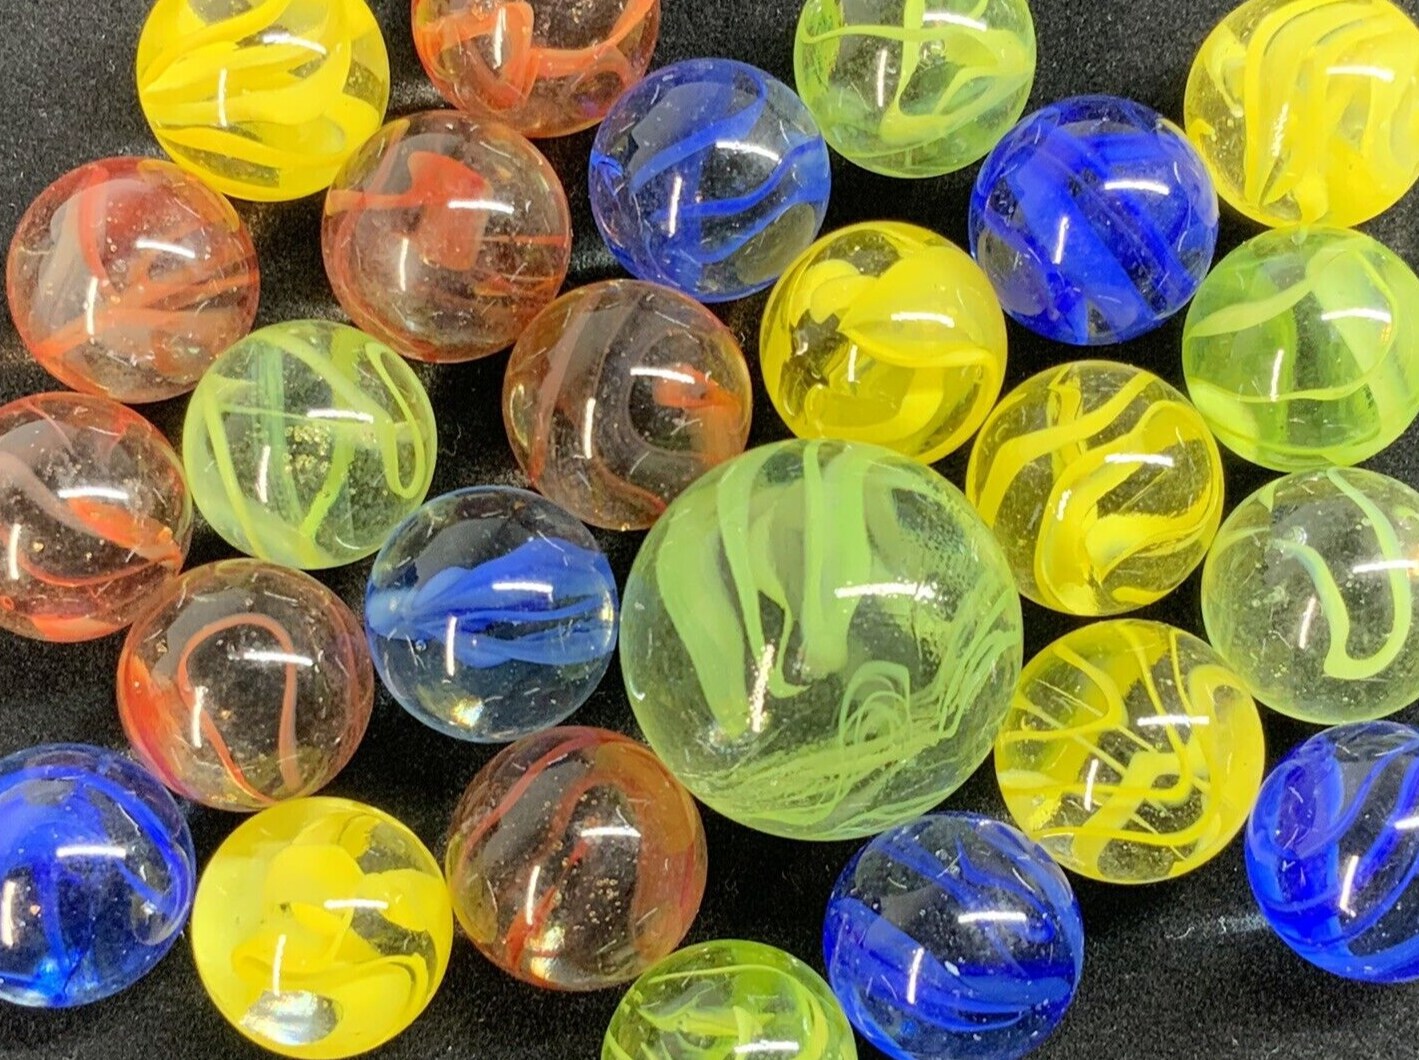 25 Glass Marbles Spiral Galaxy Confetti Spaghetti Cat Eye Red/Yellow/Blue/Green Cats Eyes Pack Shooter